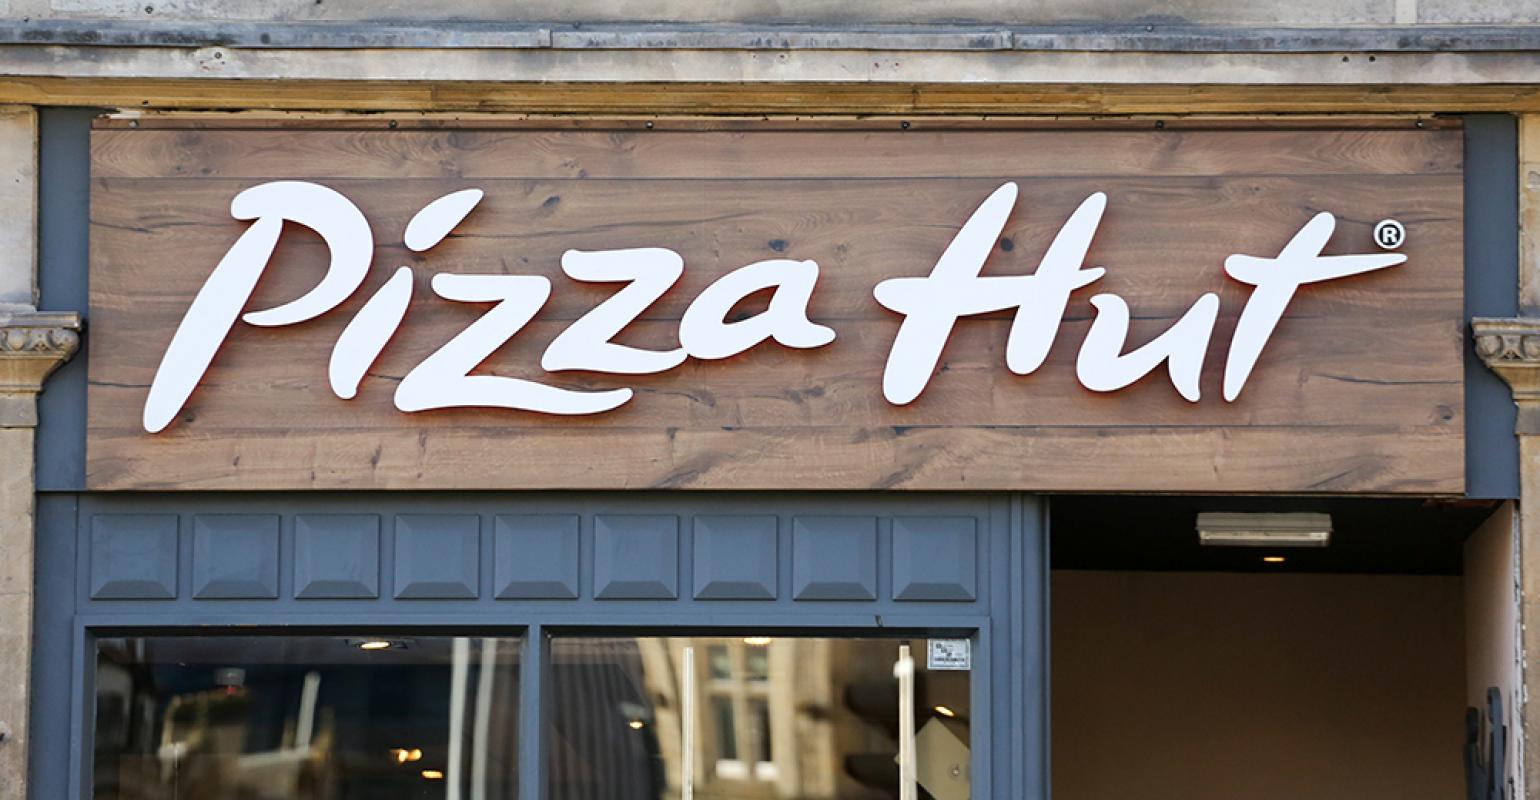 Pizza Hut strikes deal to open 2,550 units over 20 years Nation's